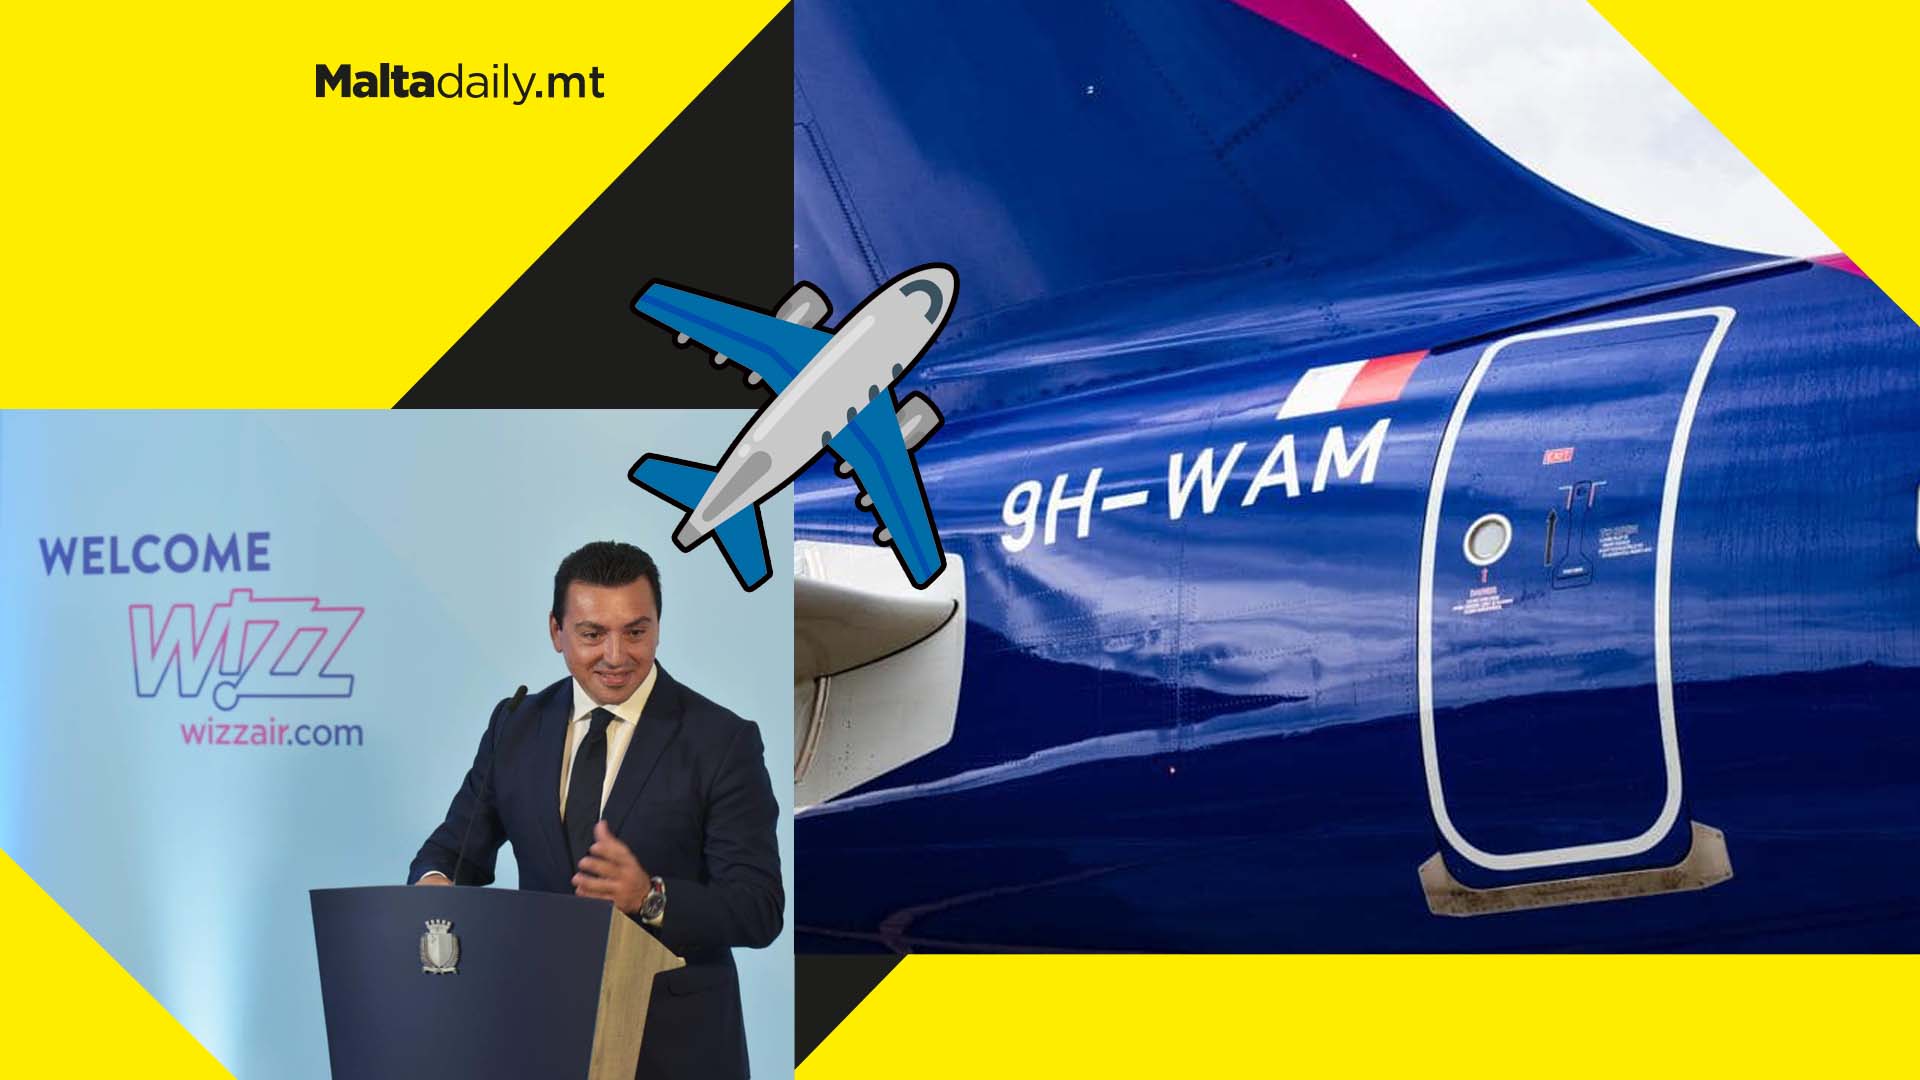 Wizz Air Malta to begin operations by Tuesday 27th September